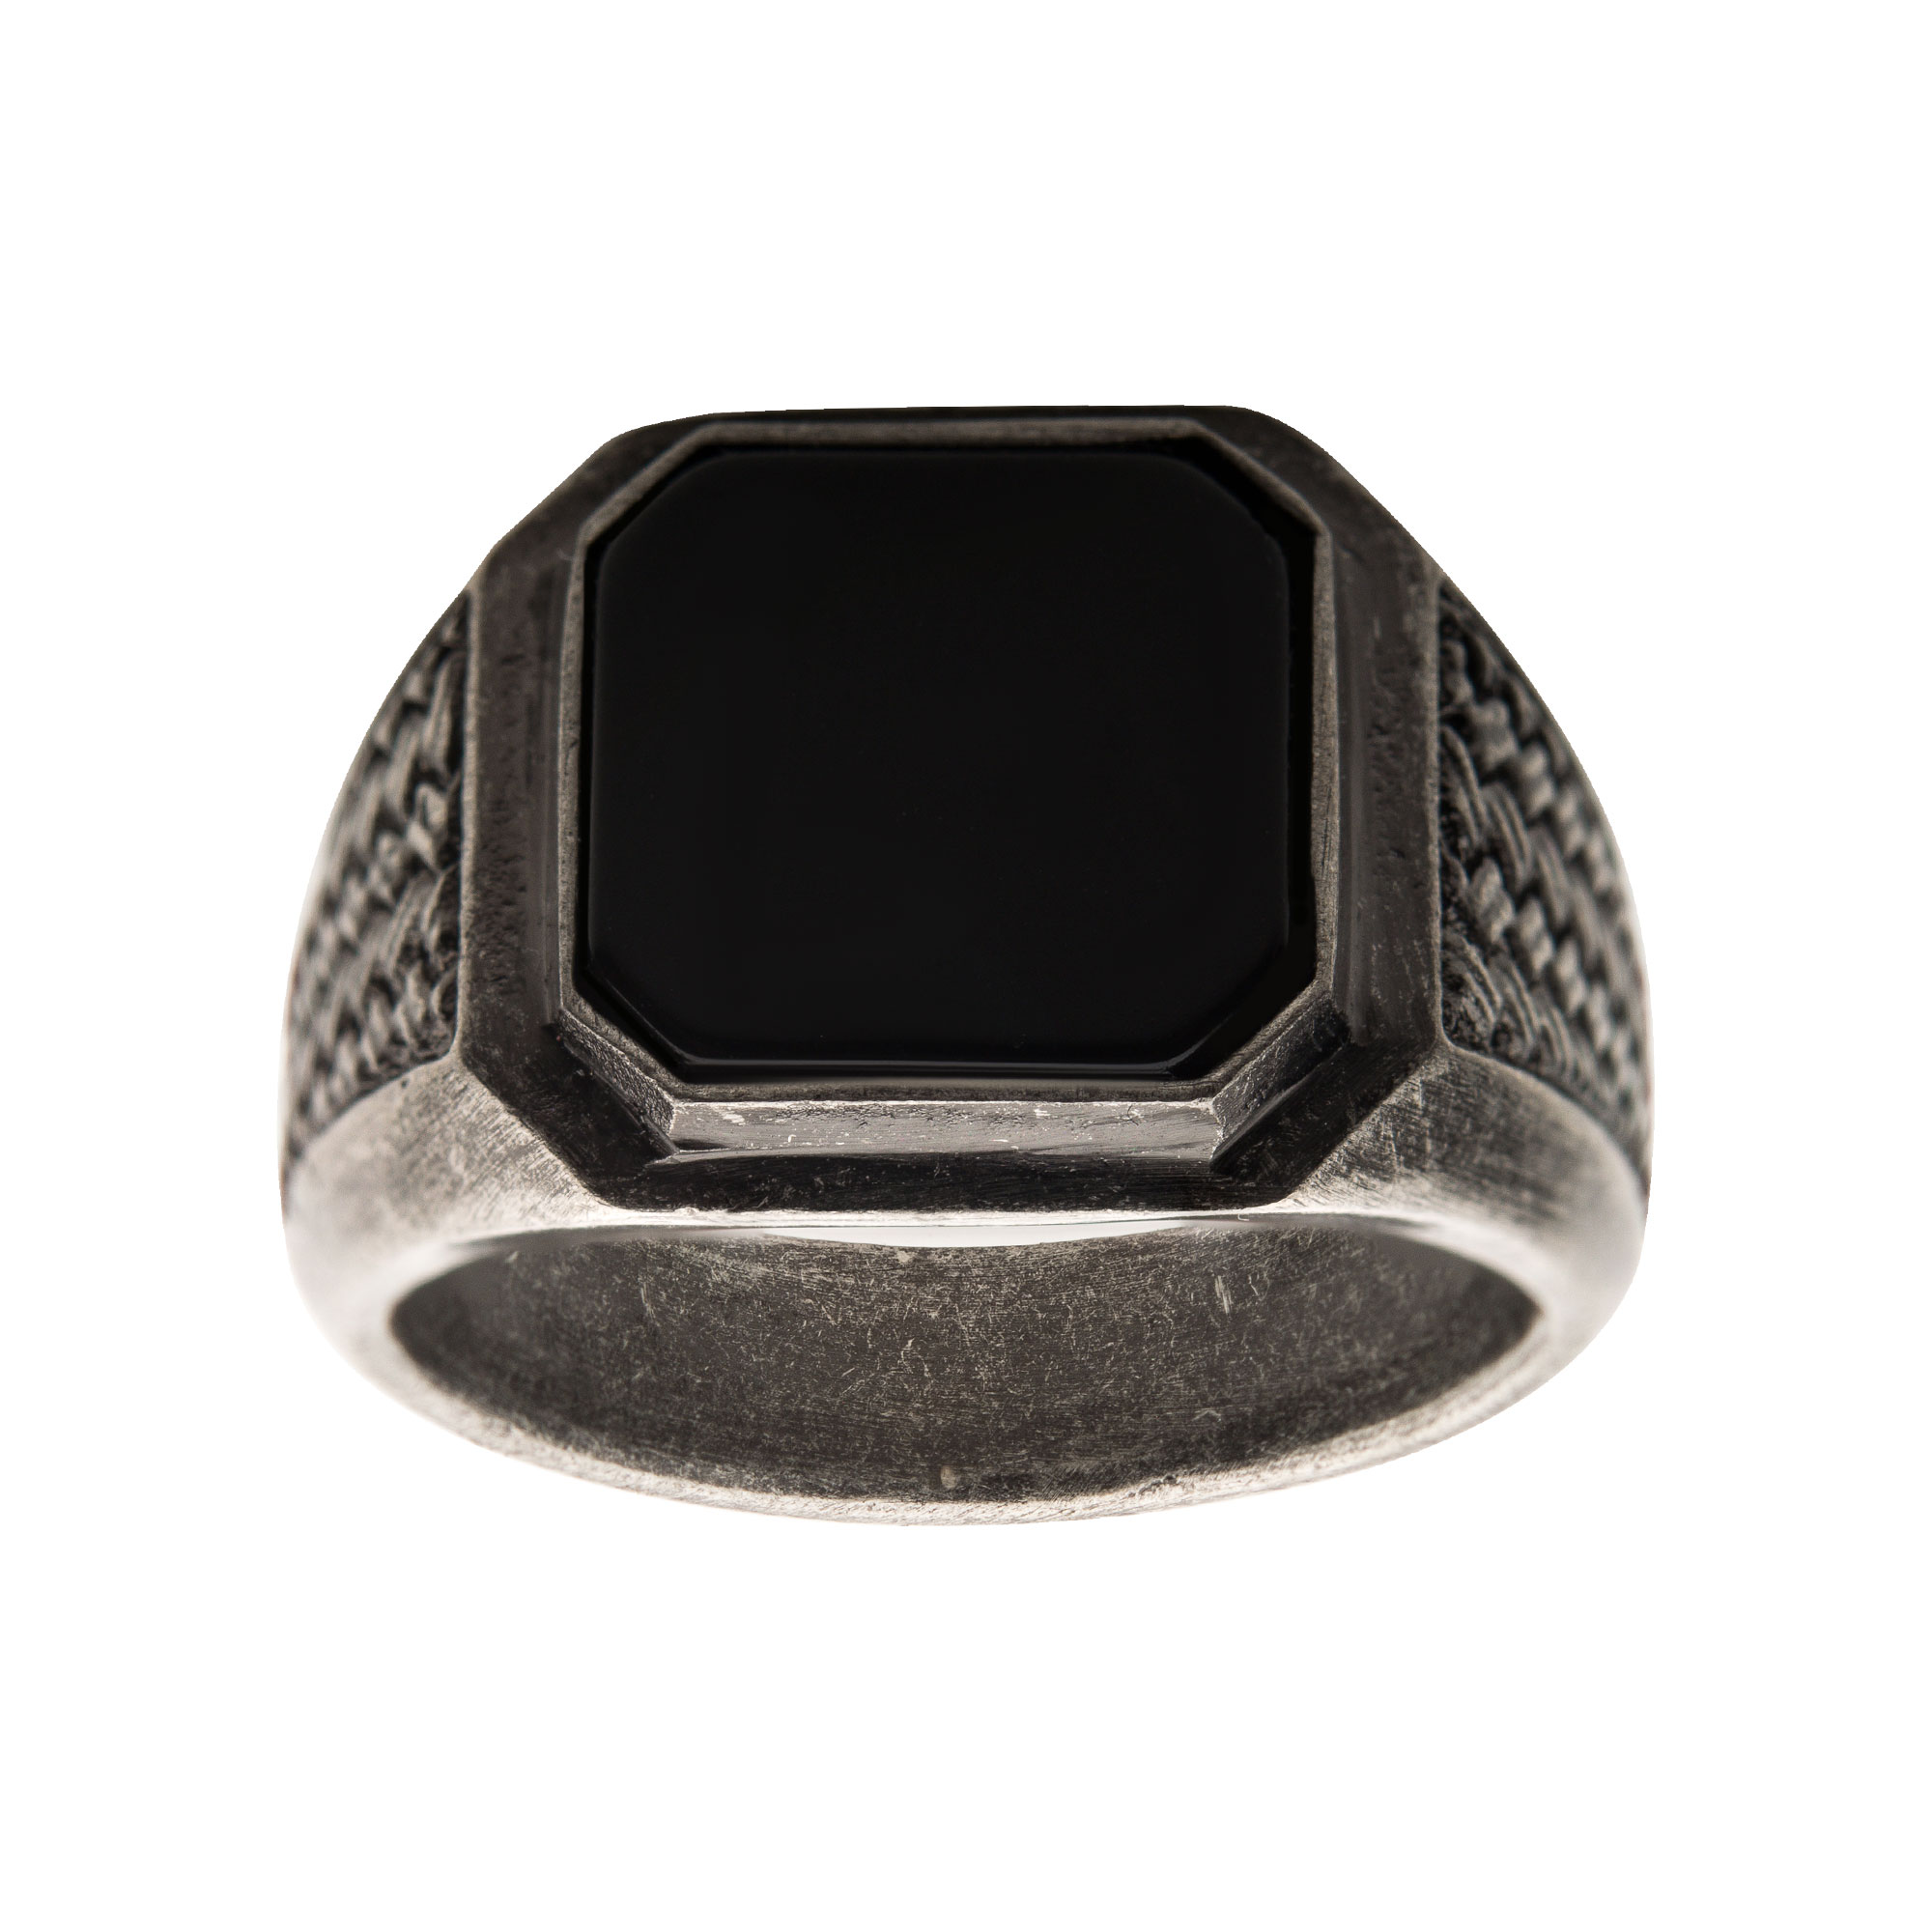 Stainless Steel Silver Plated with Black Agate Stone Ring Image 2 Midtown Diamonds Reno, NV